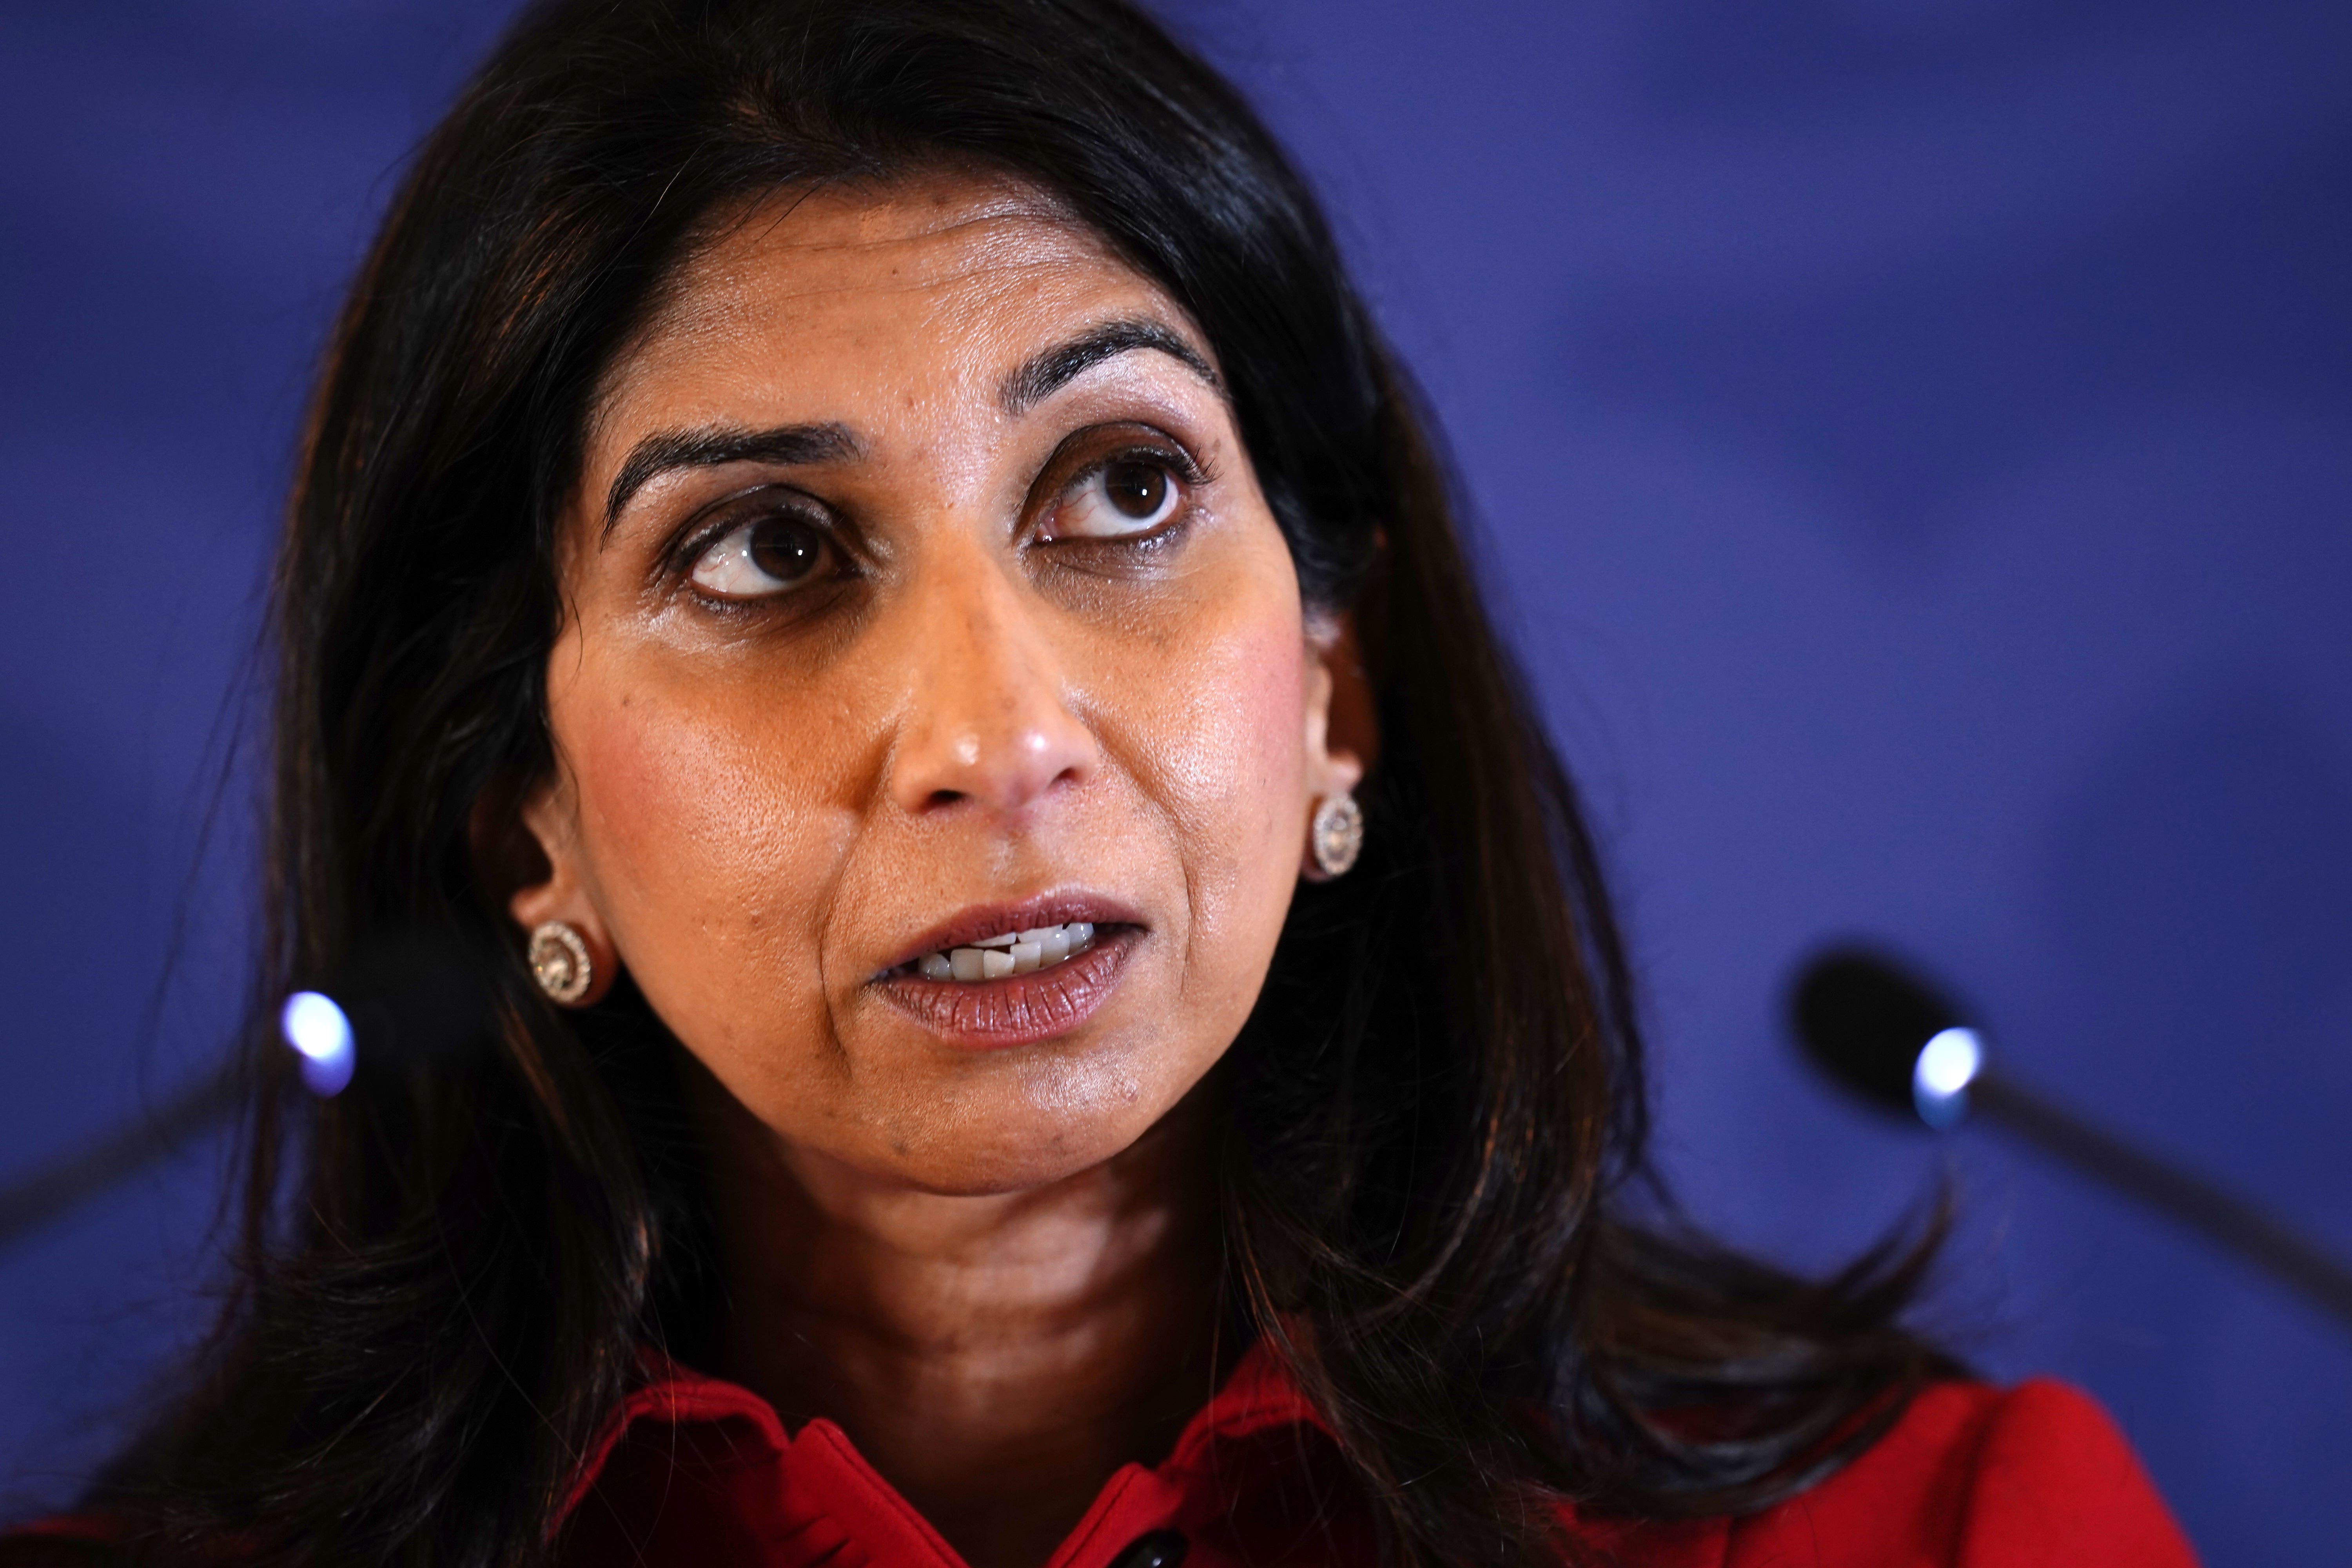 Home Secretary Suella Braverman compared the Oxford Street incident to the ‘lawlessness’ seen in some cities in the US (Jordan Pettitt/PA)